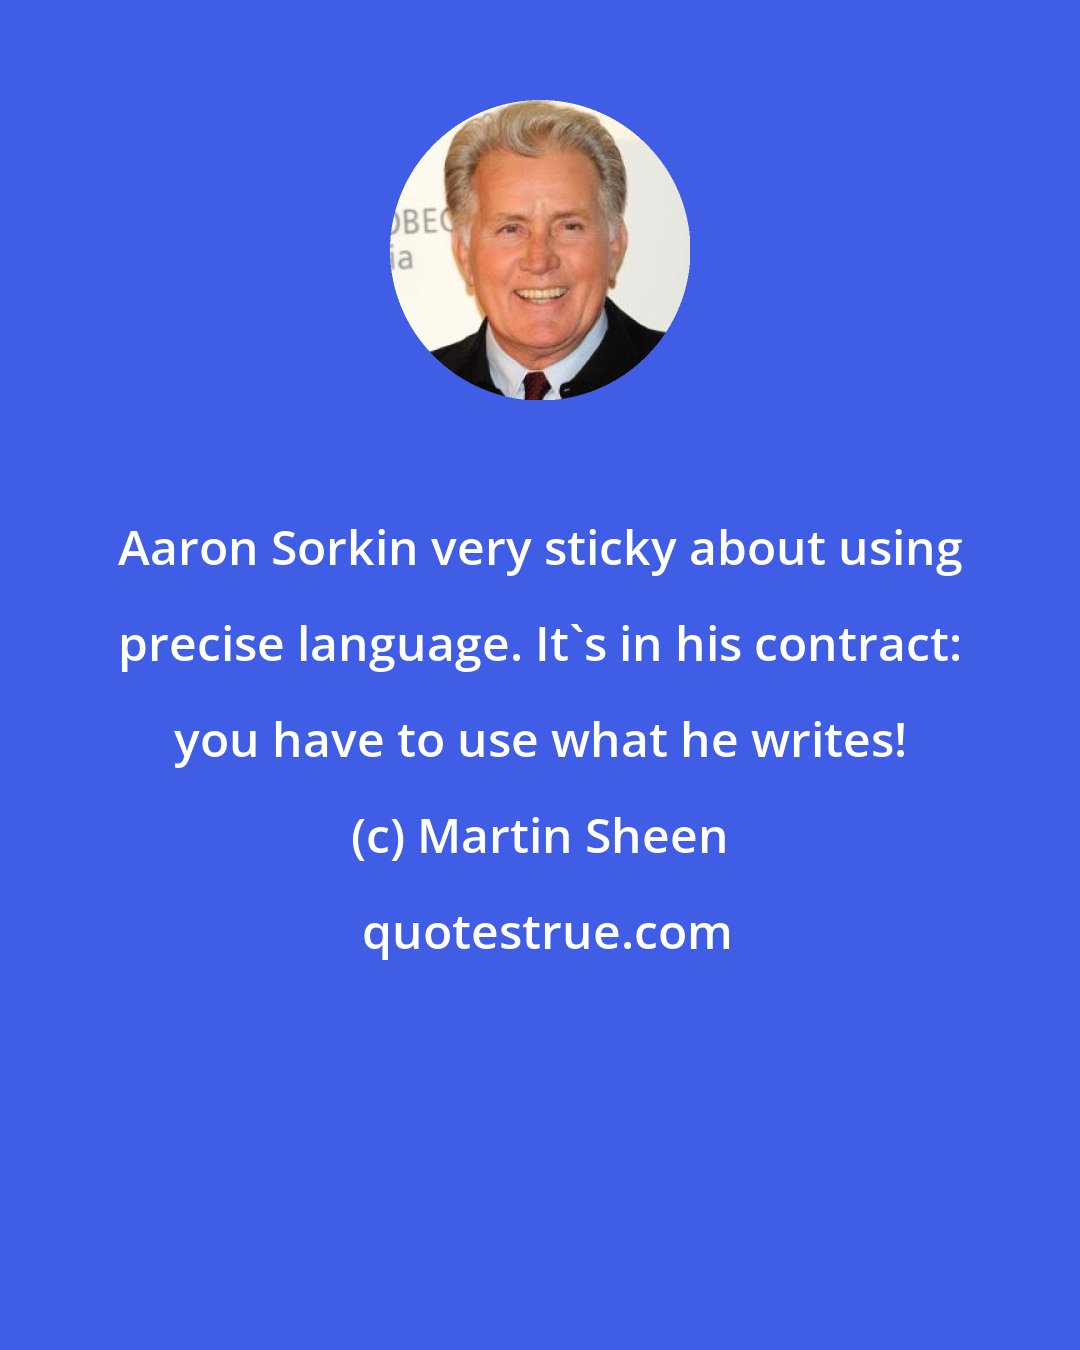 Martin Sheen: Aaron Sorkin very sticky about using precise language. It's in his contract: you have to use what he writes!